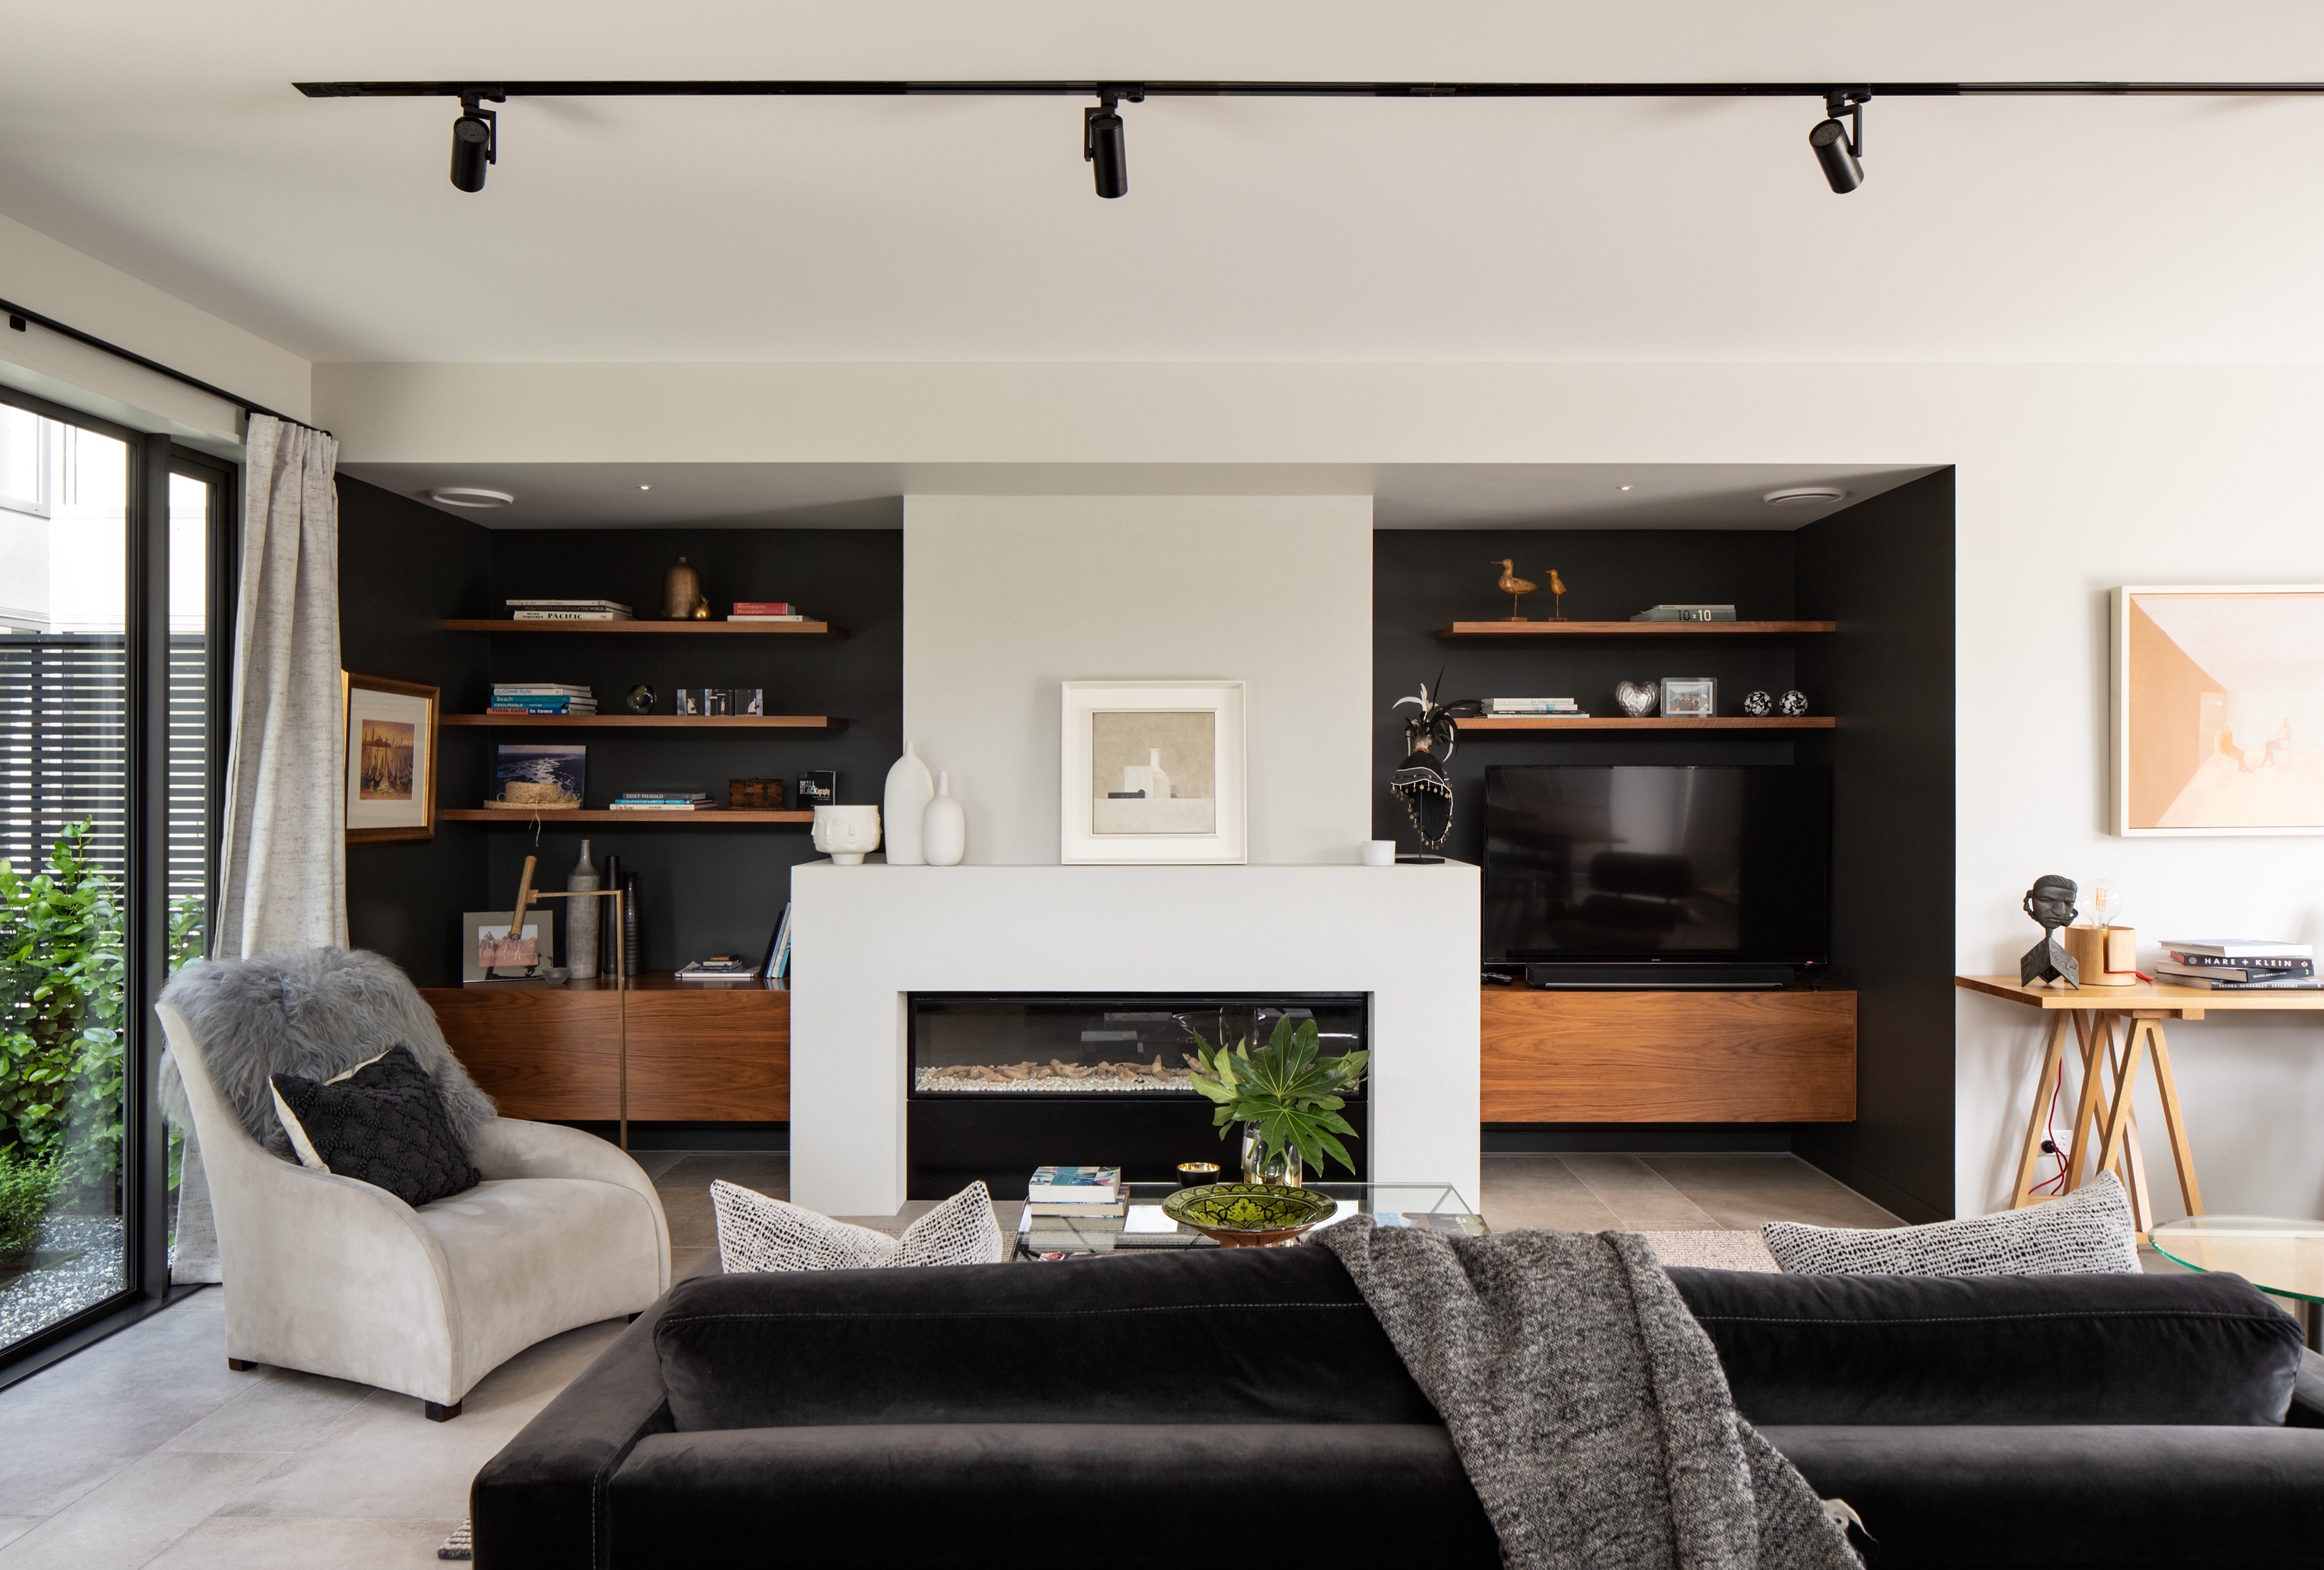 Living area with furniture and shelving